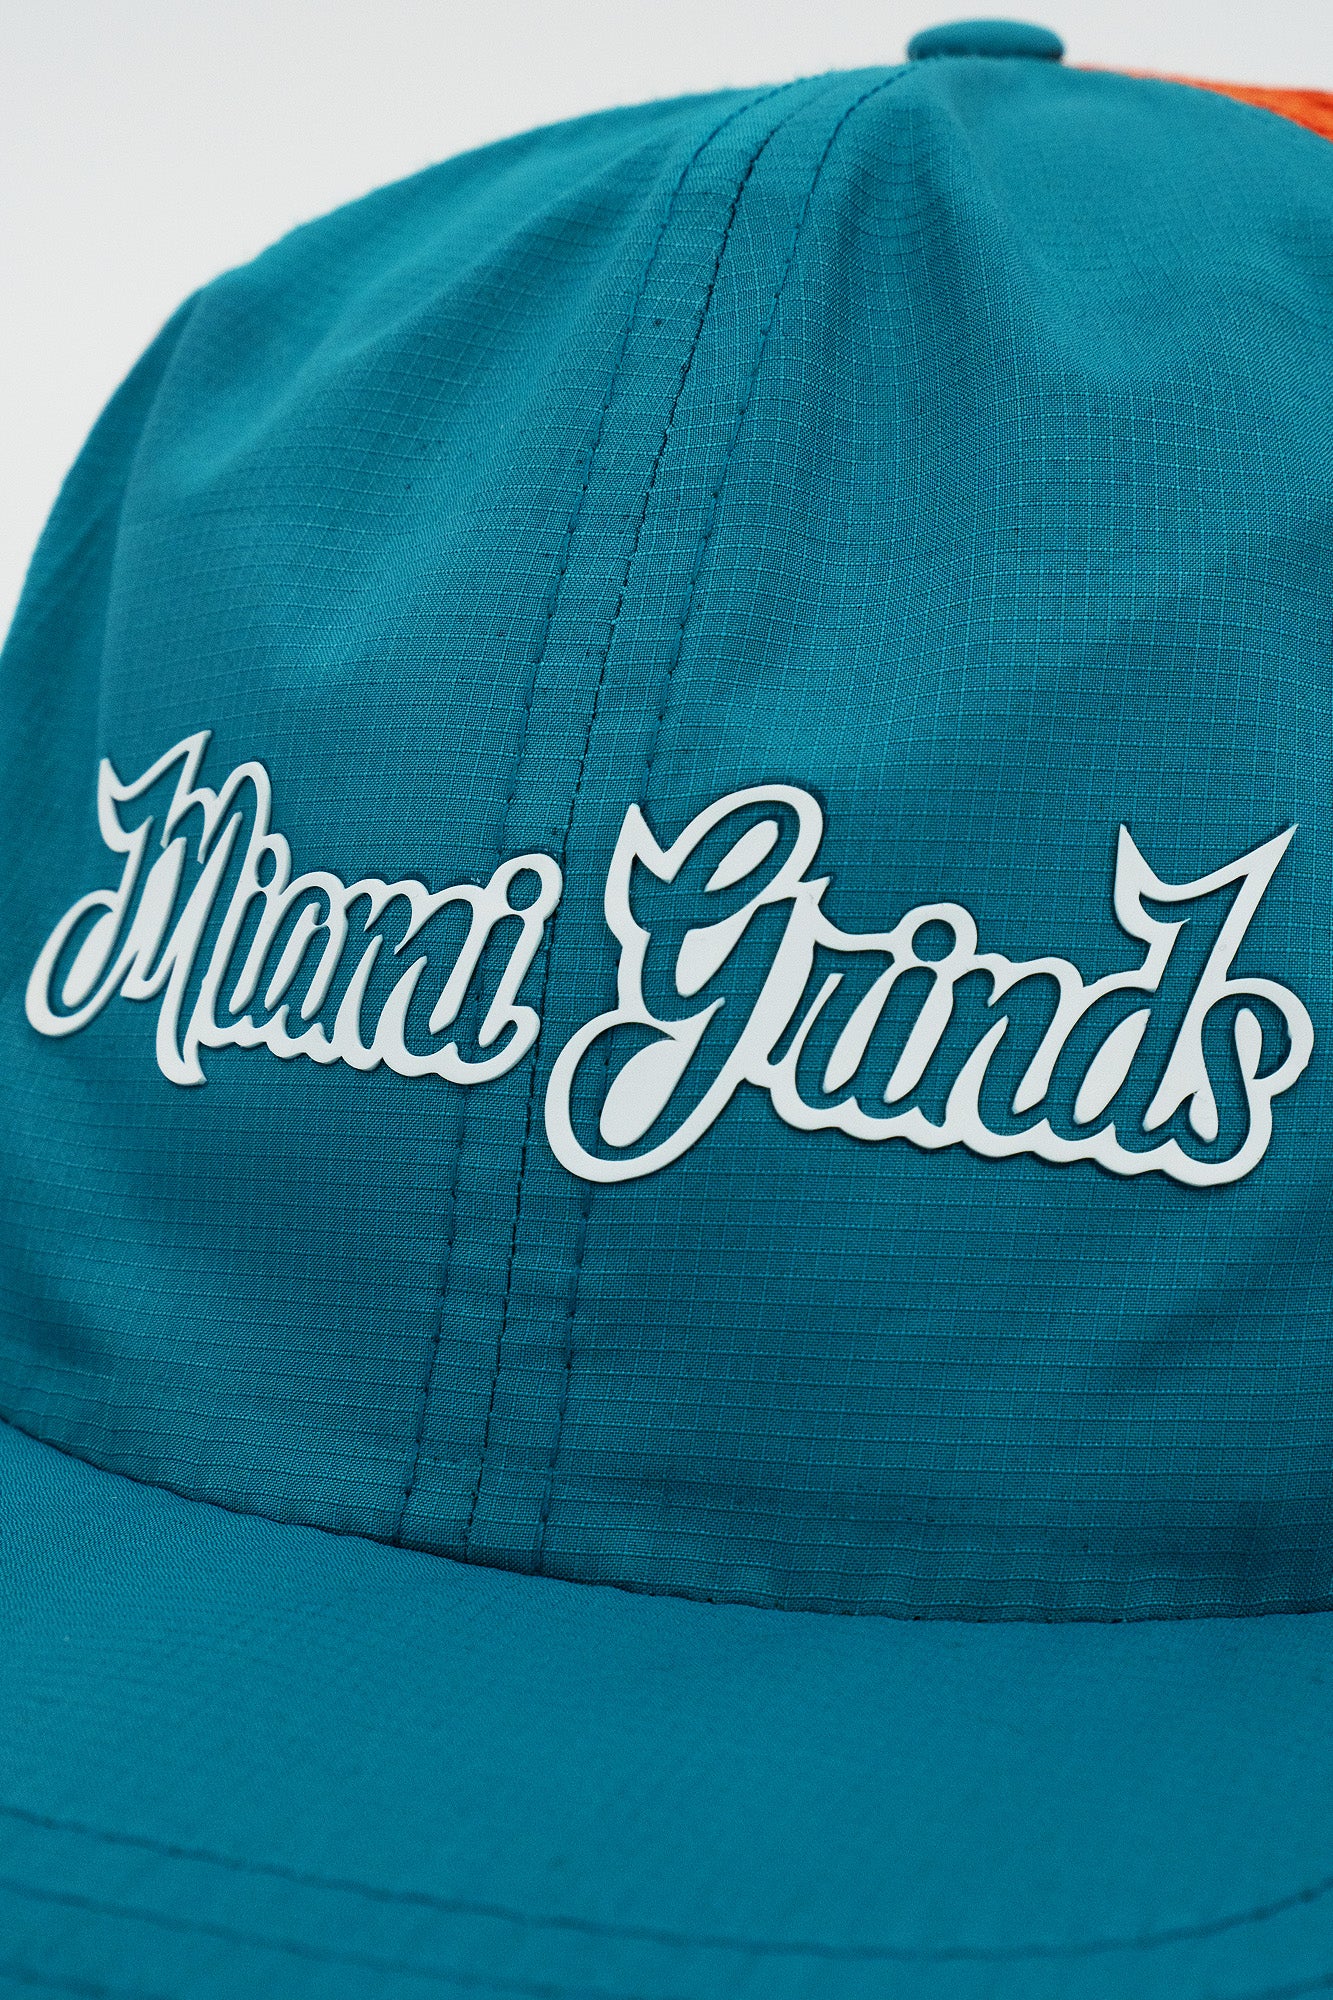 Miami Grinds Miami Dolphins NFL Mesh Teal Cap